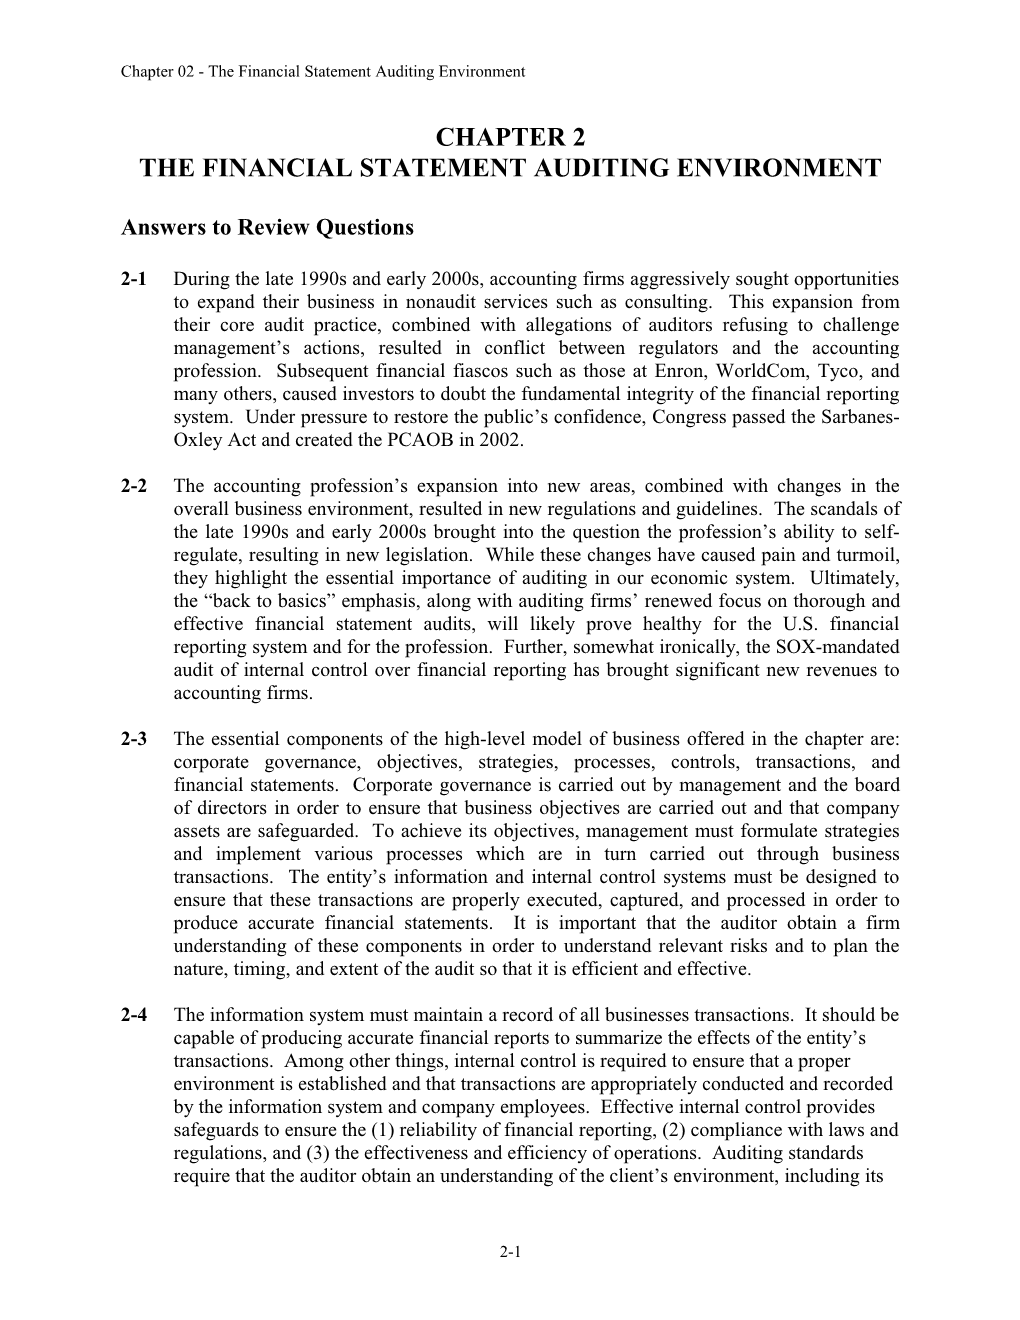 The Financial Statement Auditing Environment